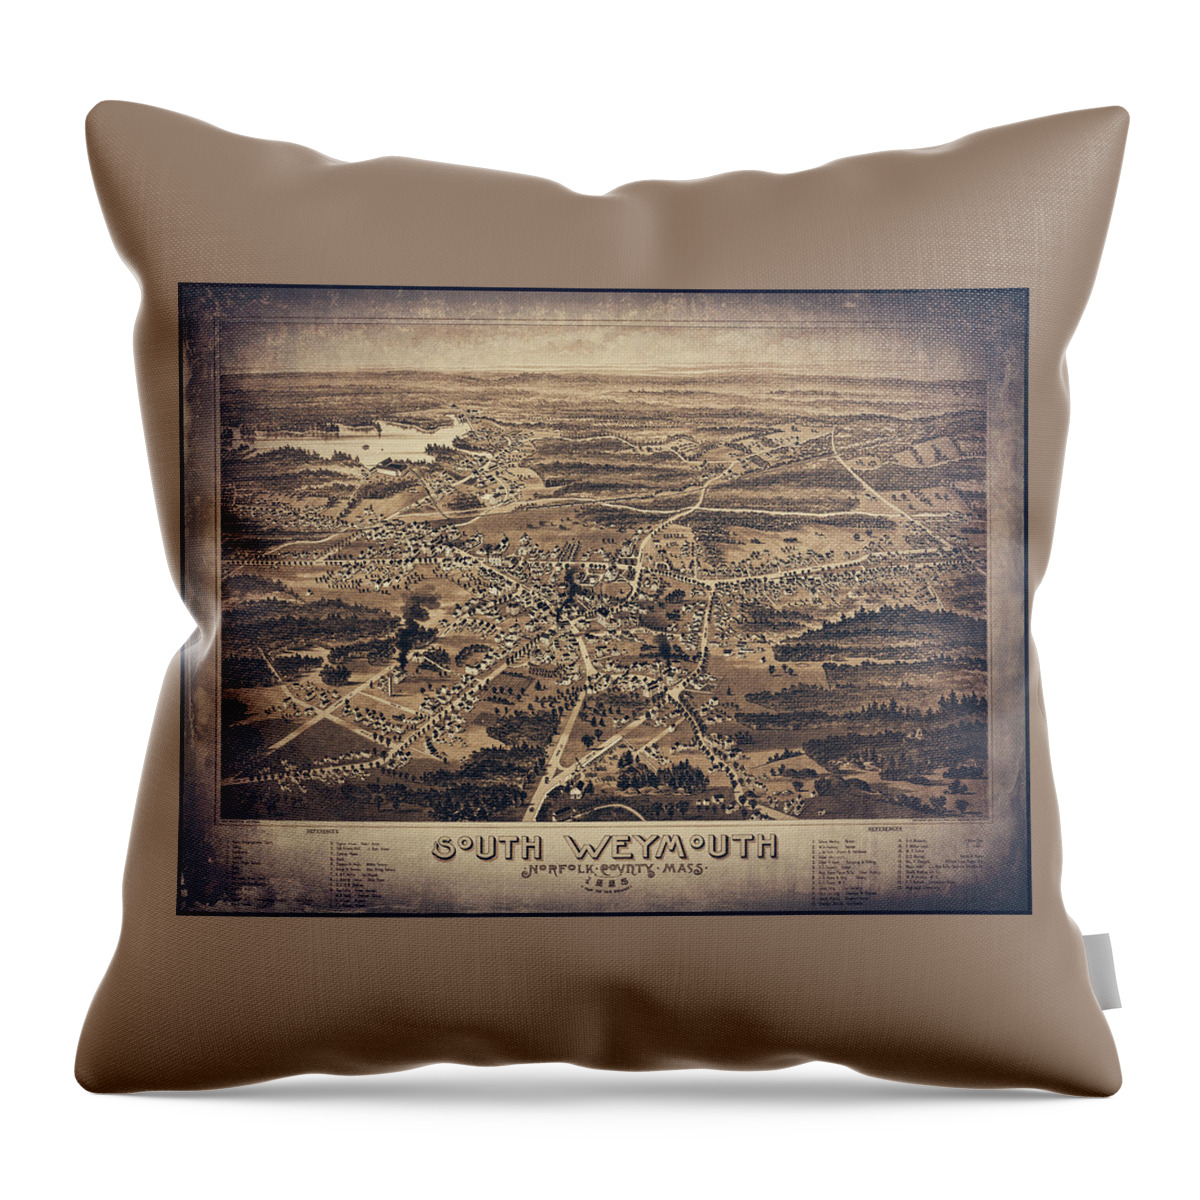 South Weymouth Throw Pillow featuring the photograph South Weymouth Massachusetts Vintage Map Birds Eye View 1885 Sepia by Carol Japp